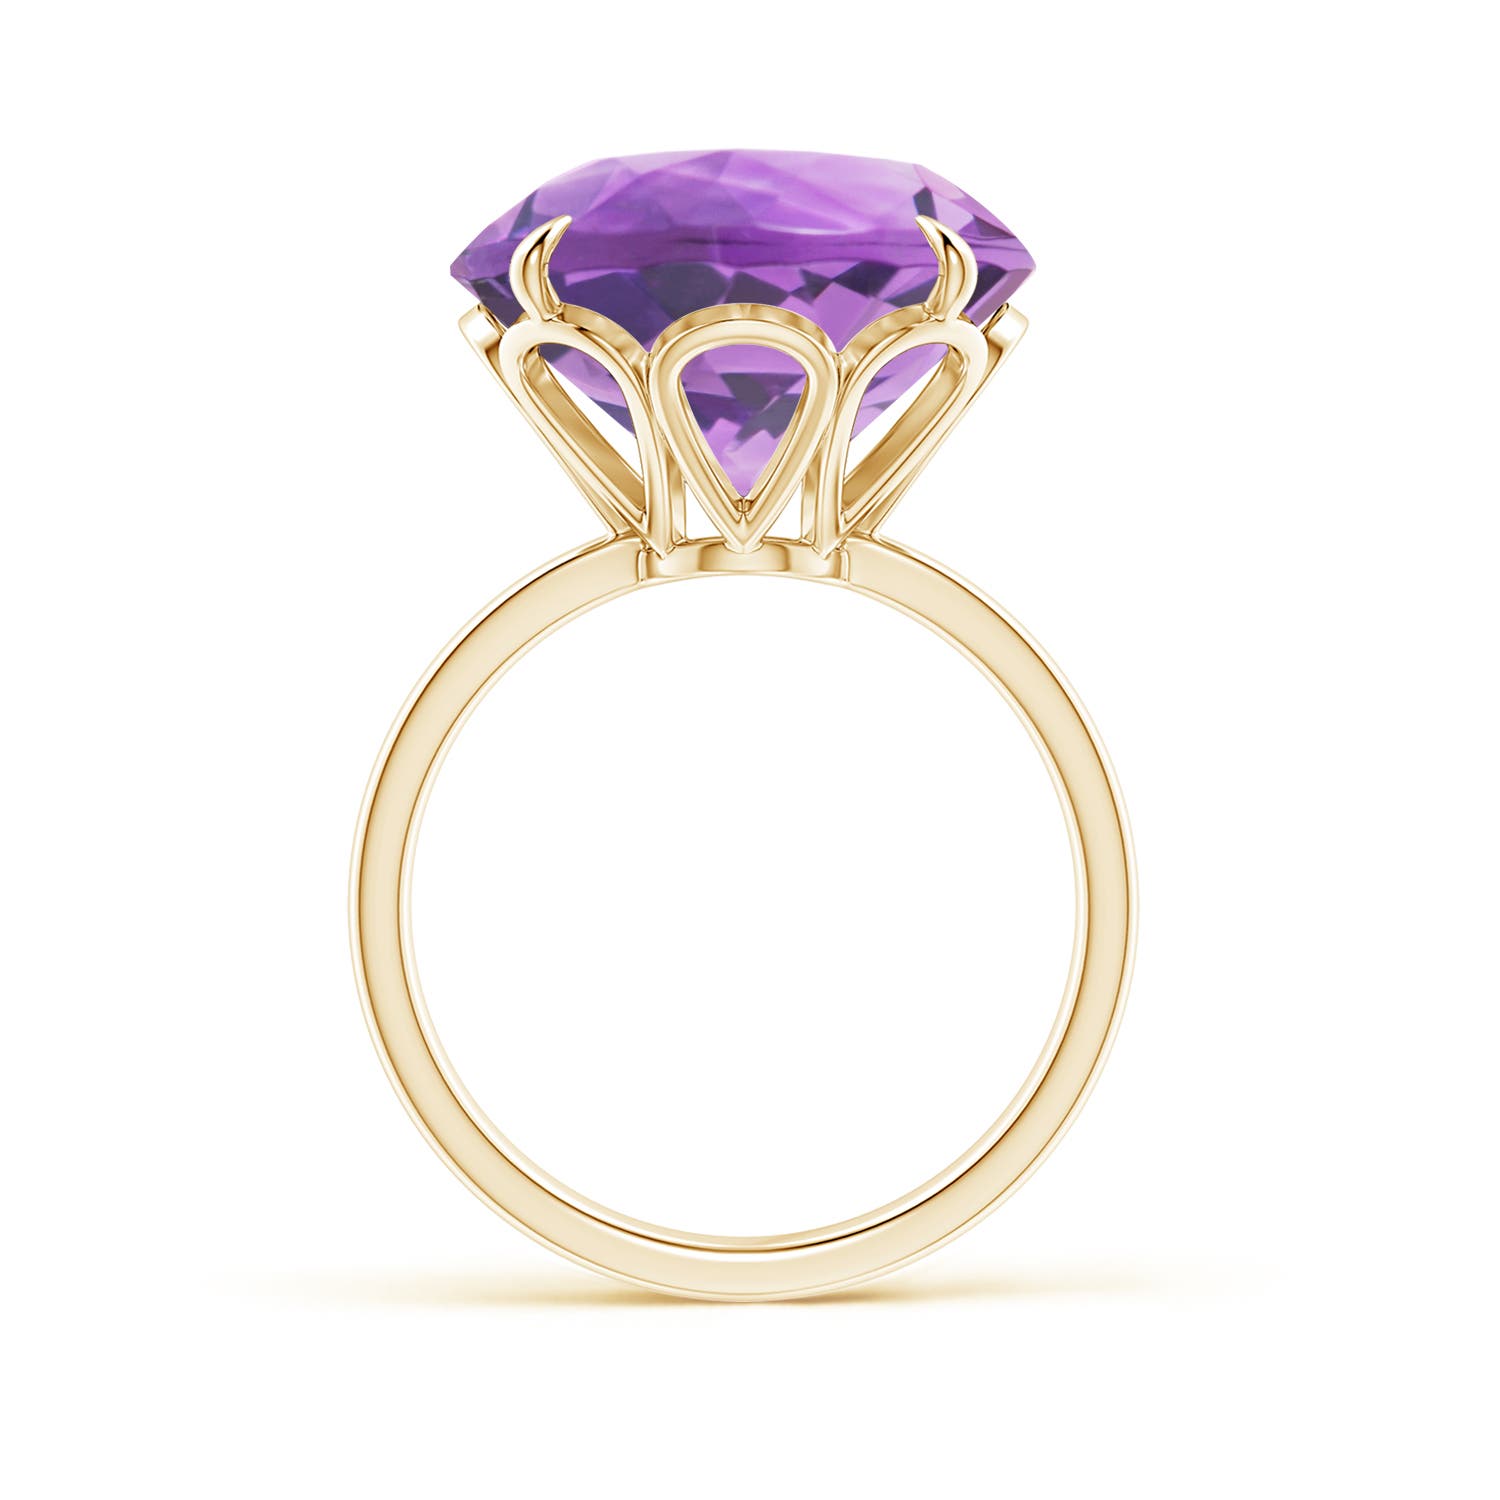 A- Amethyst / 11 CT / 14 KT Yellow Gold